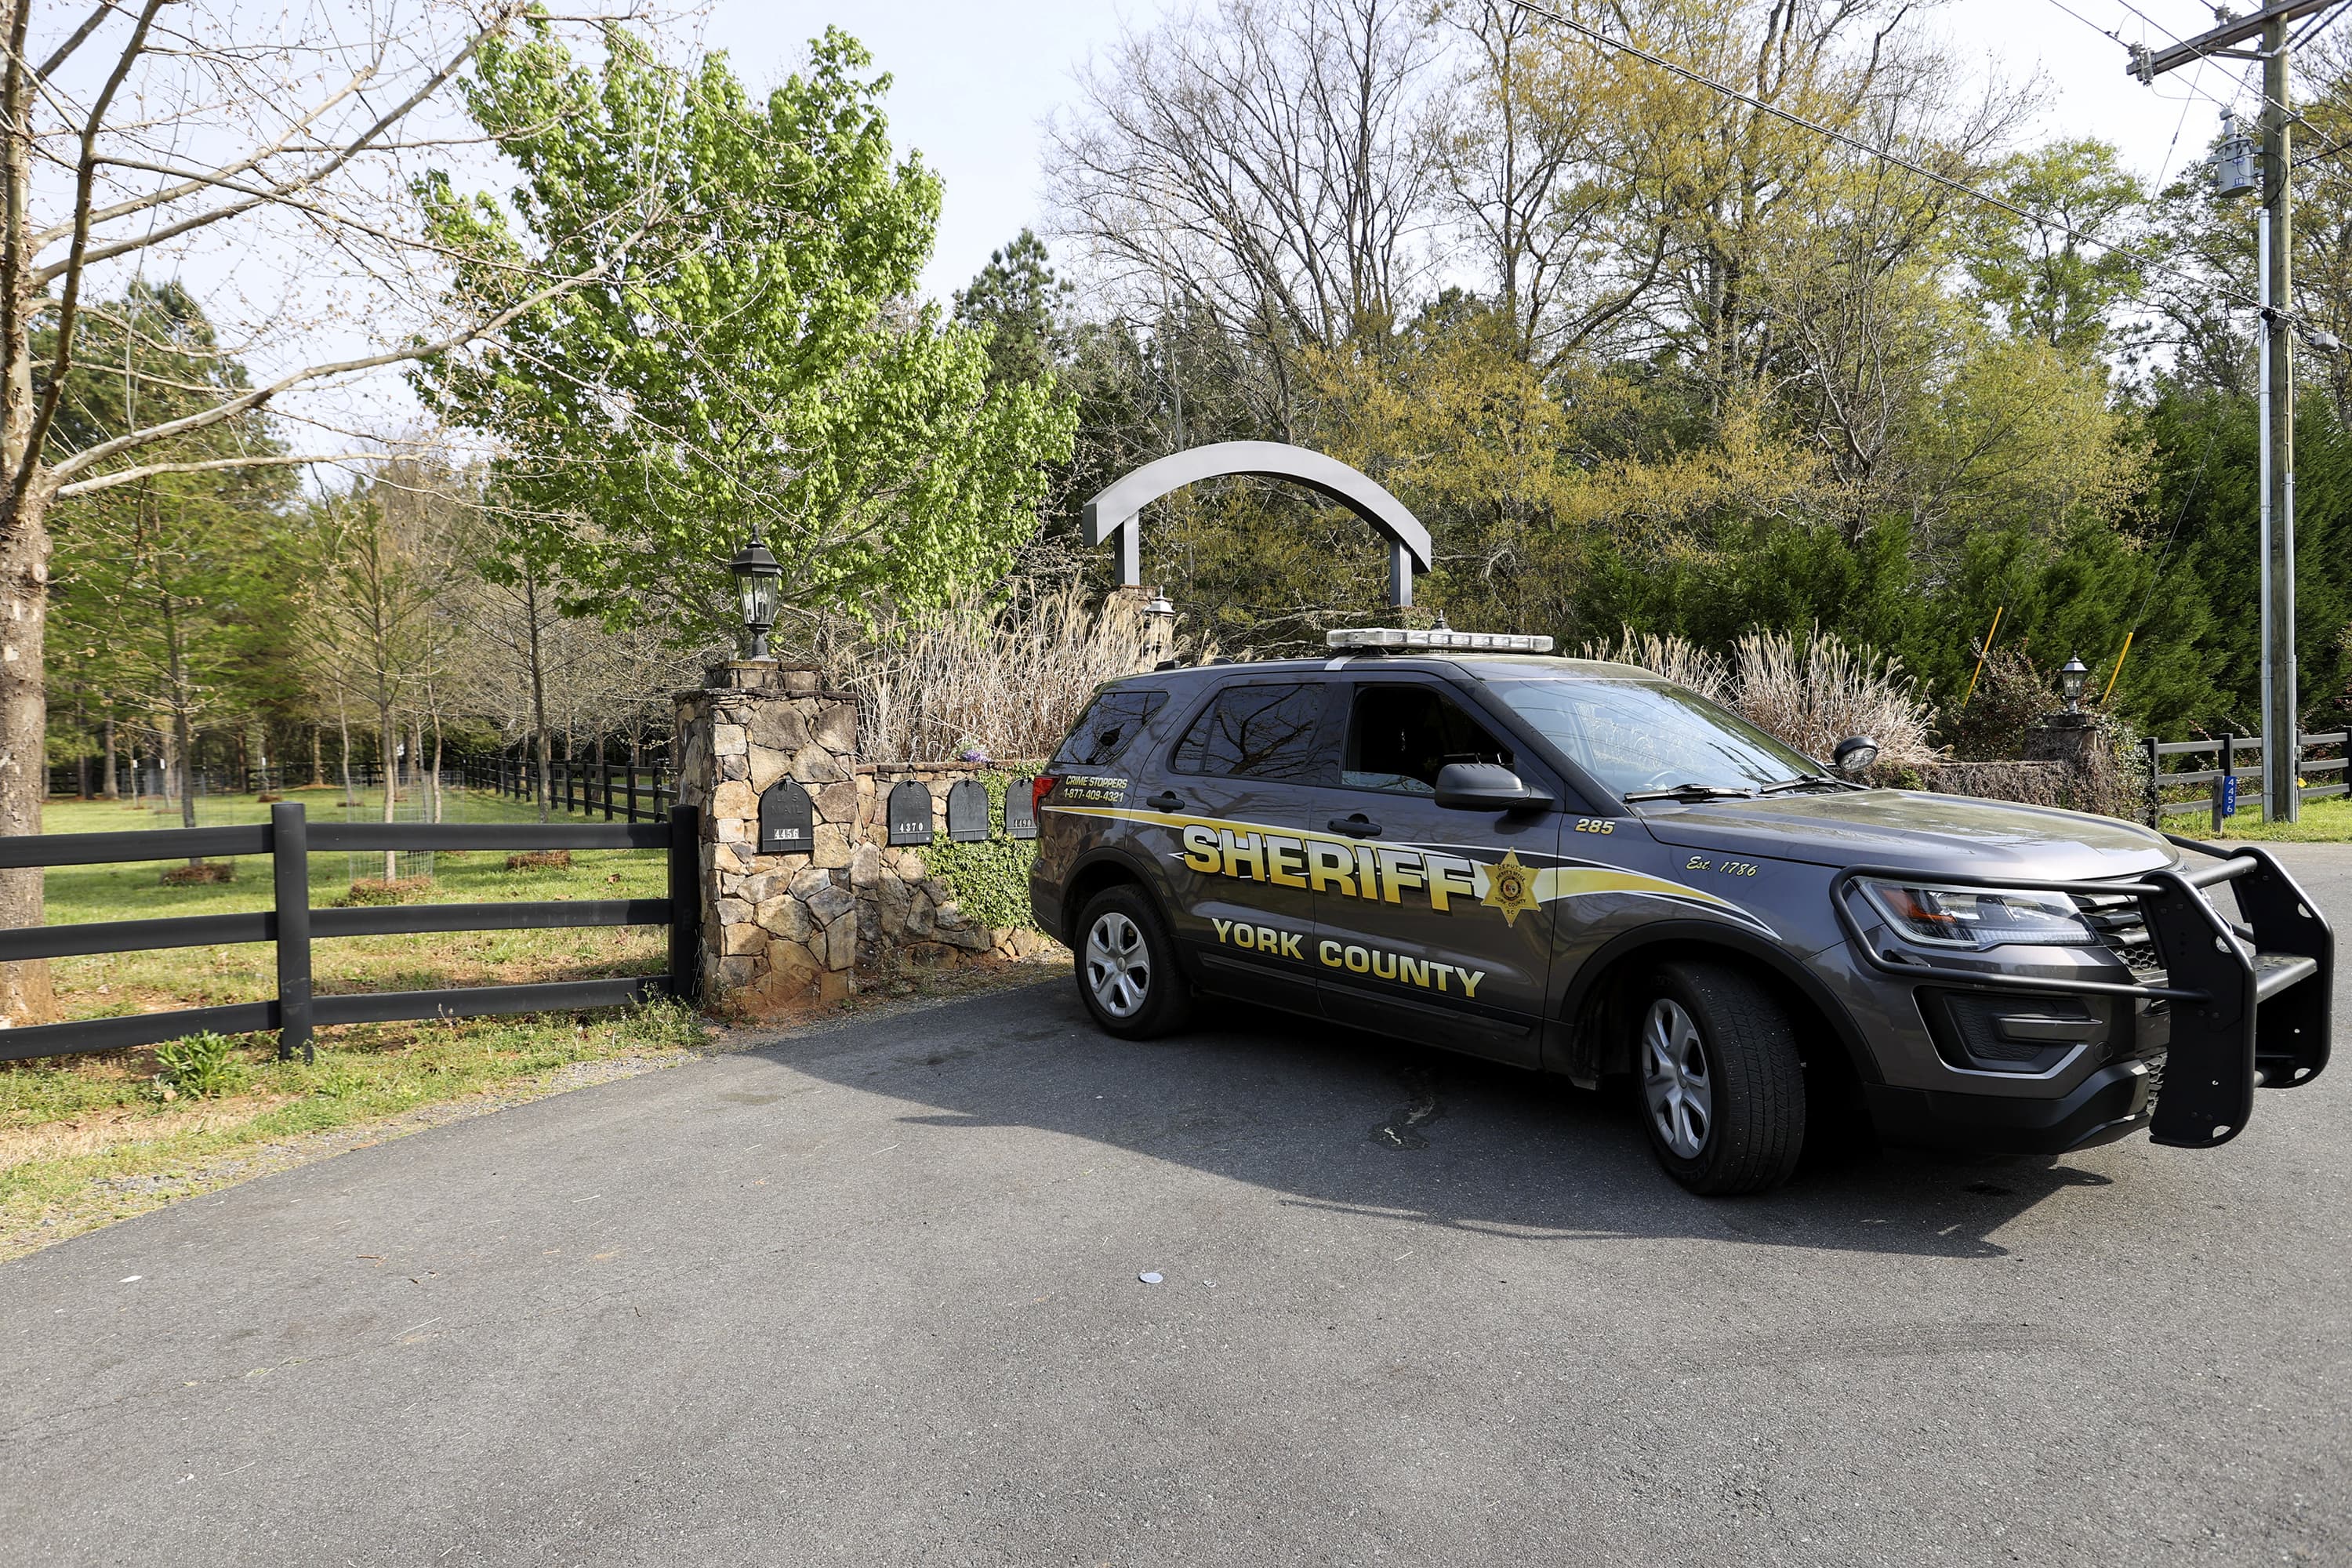 A York County sheriff's deputy is parked outside a residence where multiple people, including a prominent doctor, were fatally shot a day earlier, on April 8 in Rock Hill, S.C. (Nell Redmond/AP)